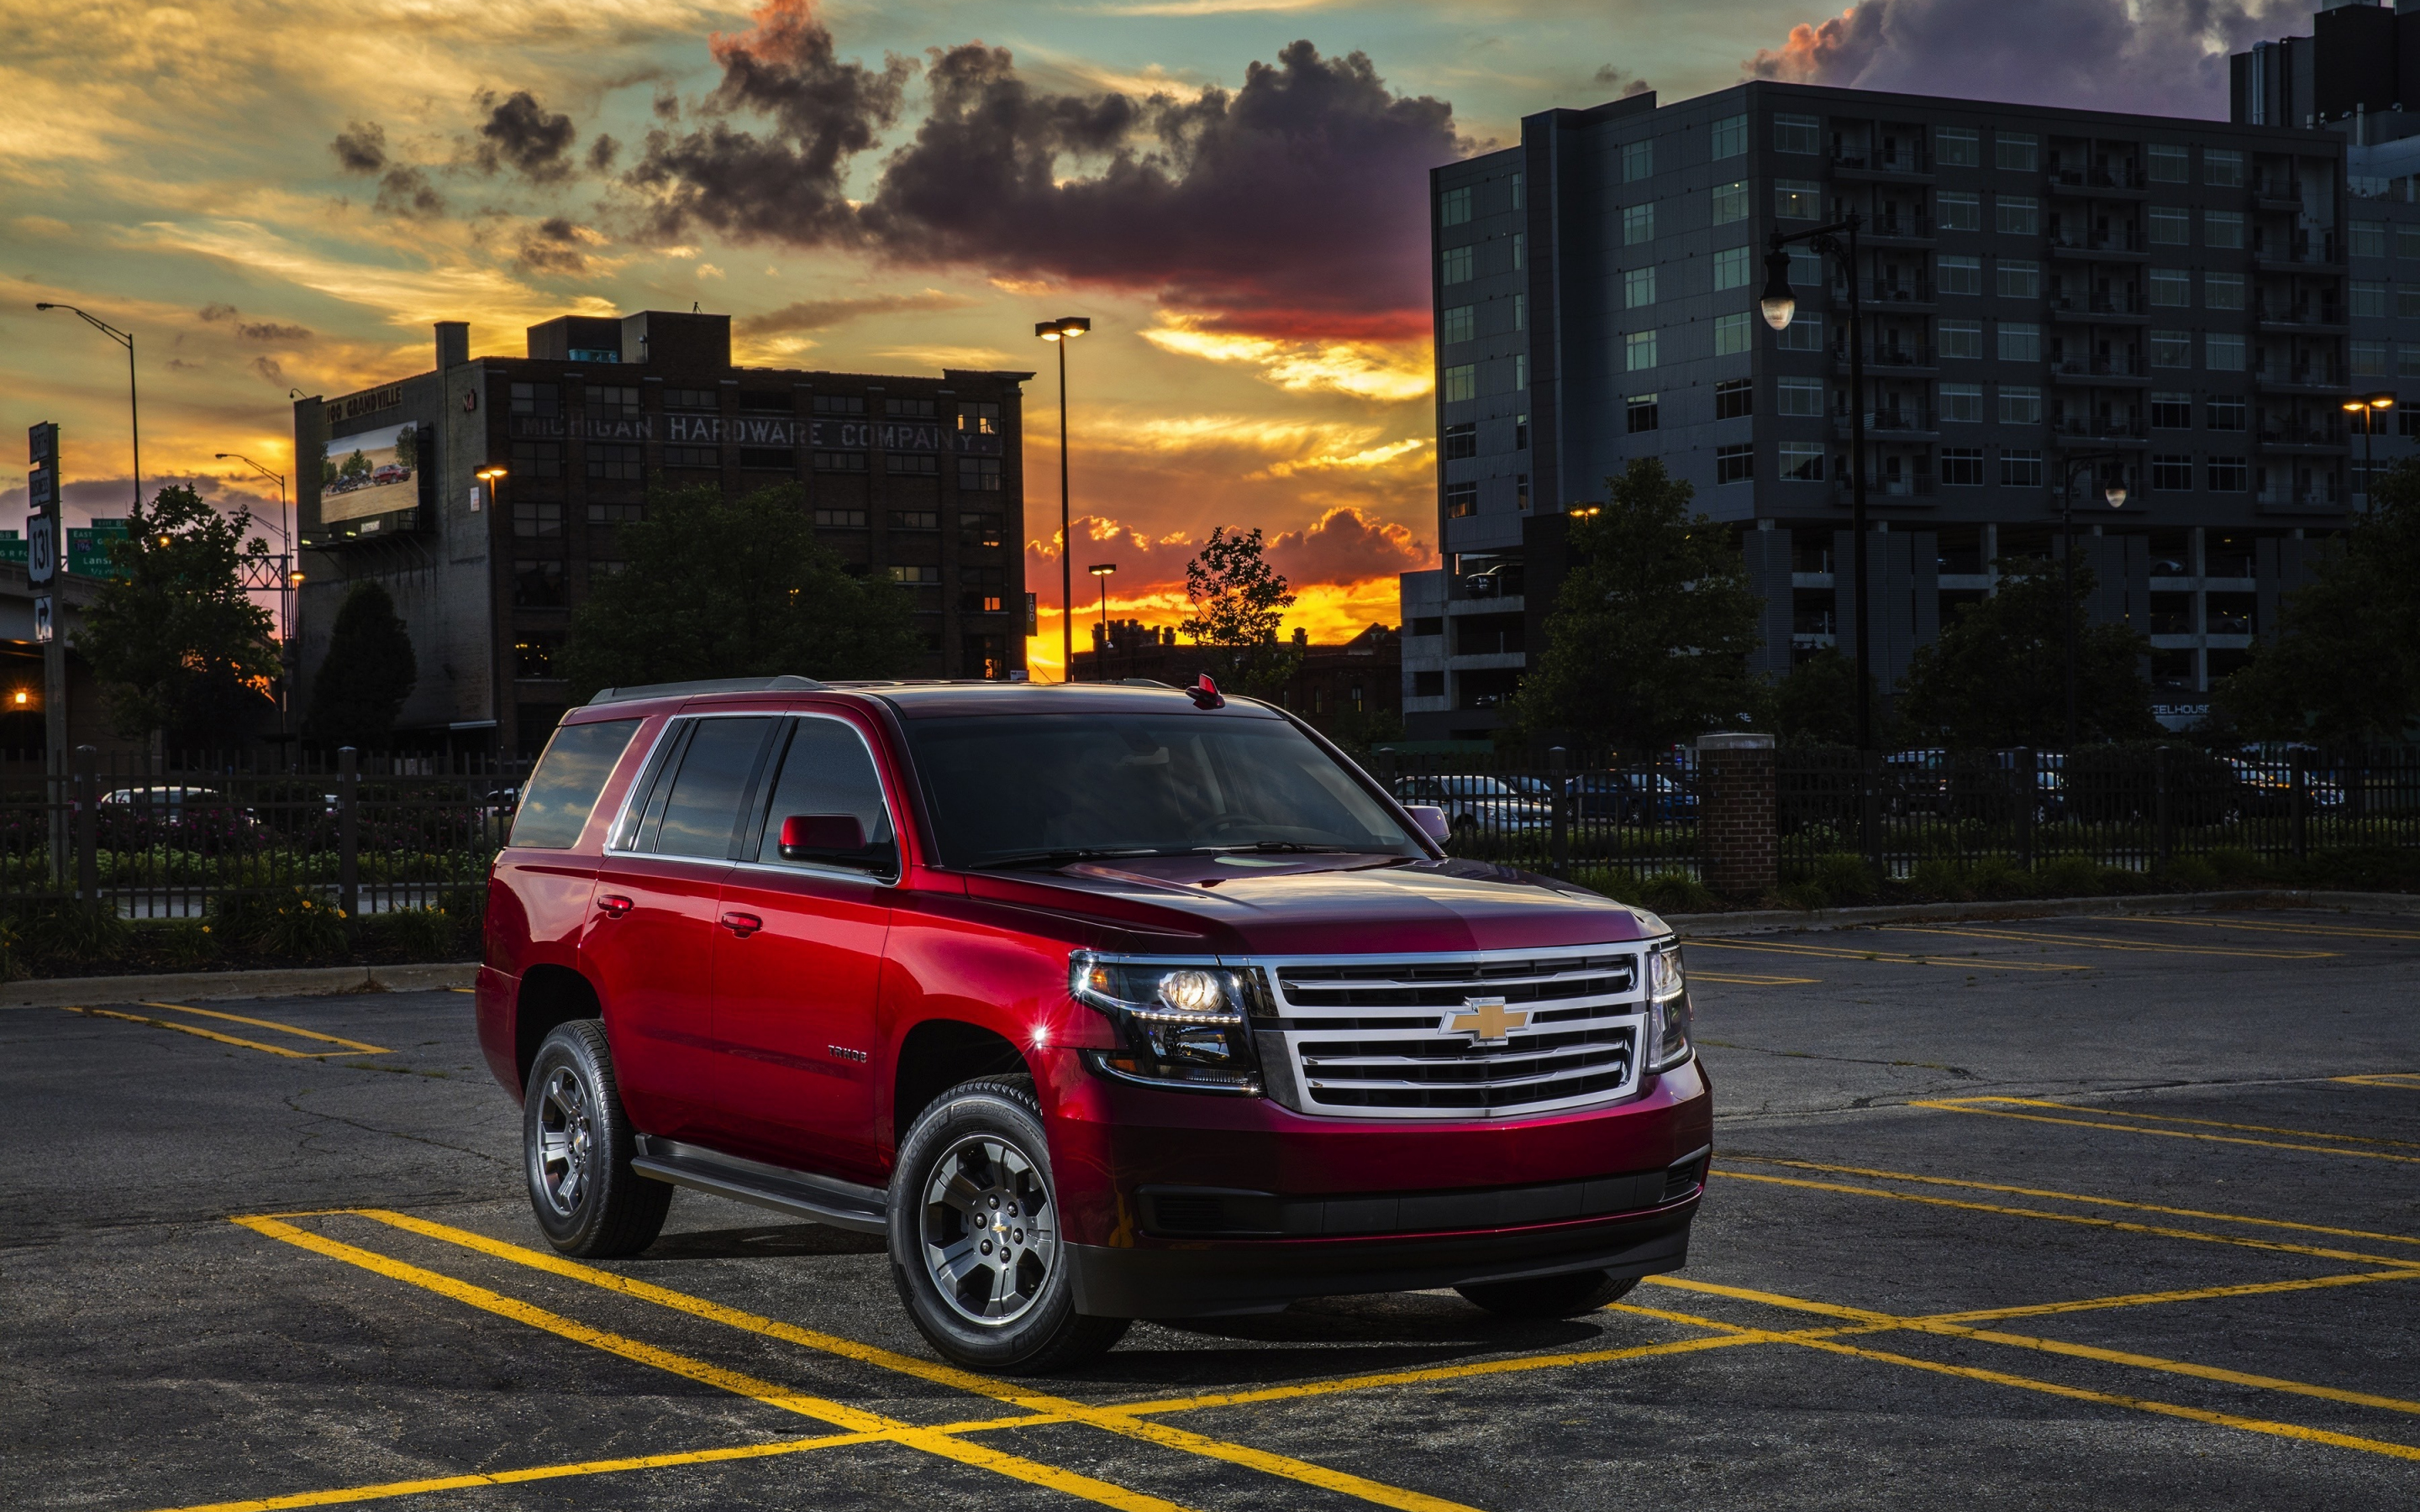 Red, suv, Chevrolet Tahoe, front, 2880x1800 wallpaper